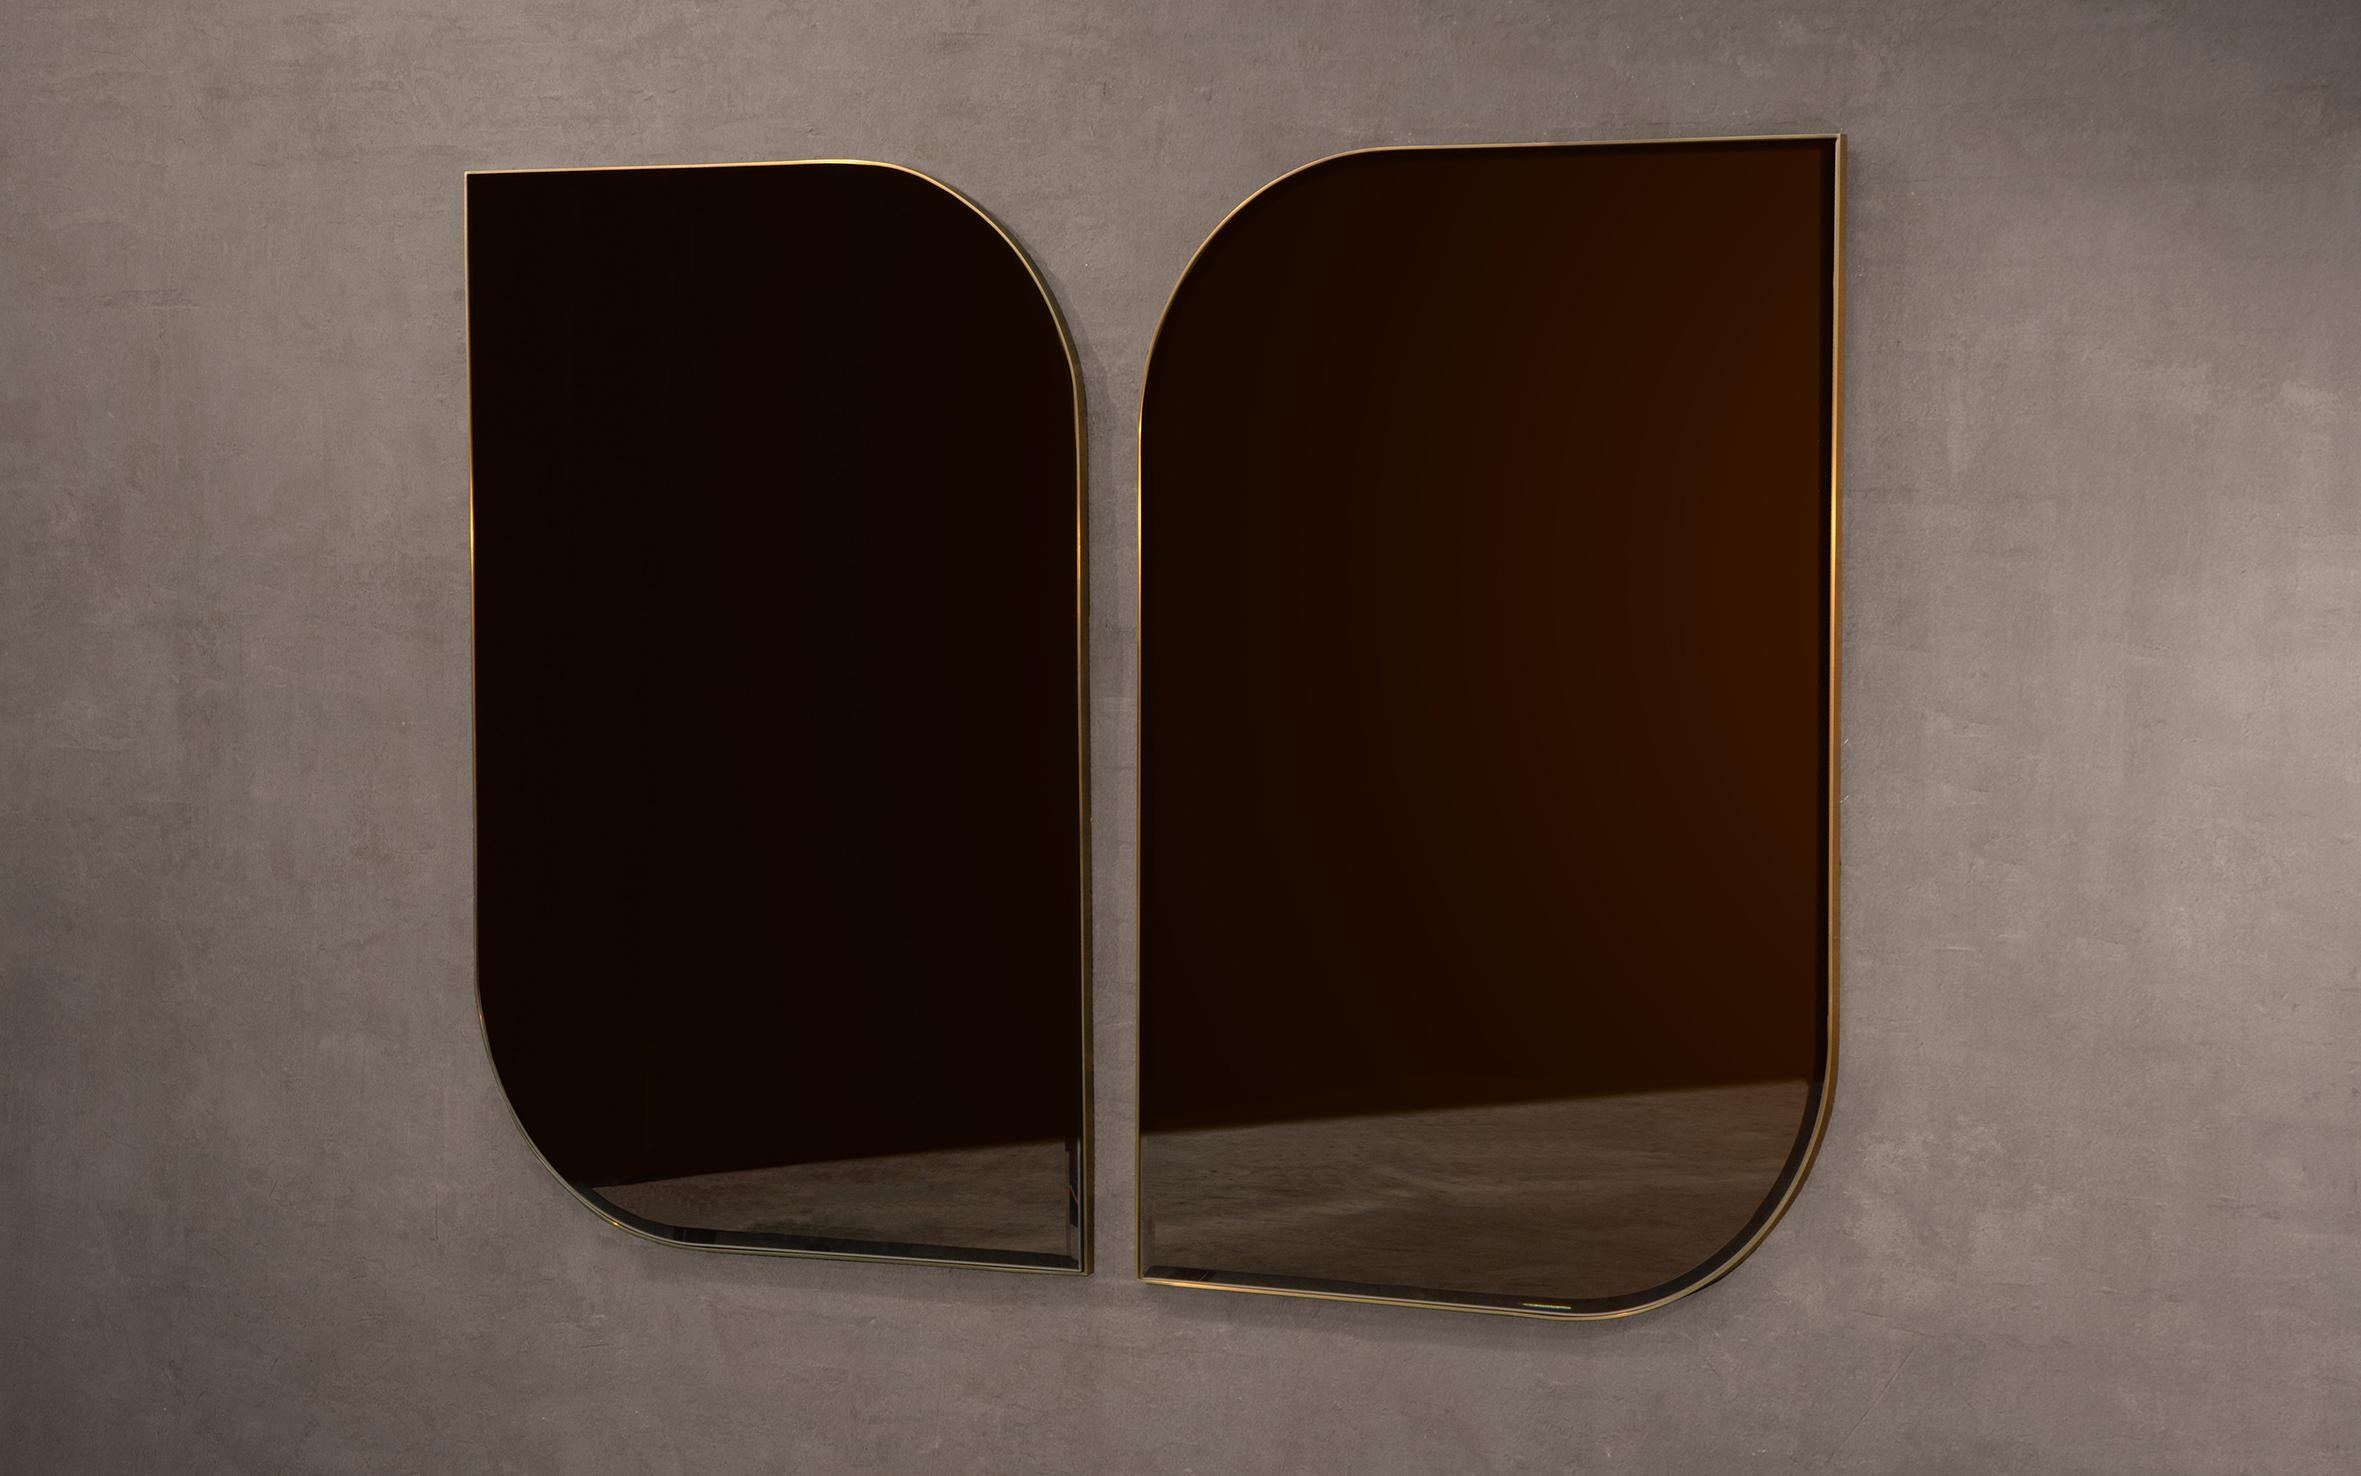 A handcrafted wall mirror in polished brass and bevelled, bronze tinted glass. Available in left and right handed options for the opportunity of pairing two together.

Can be hung in both portrait and landscape orientations.Supplied with two screw